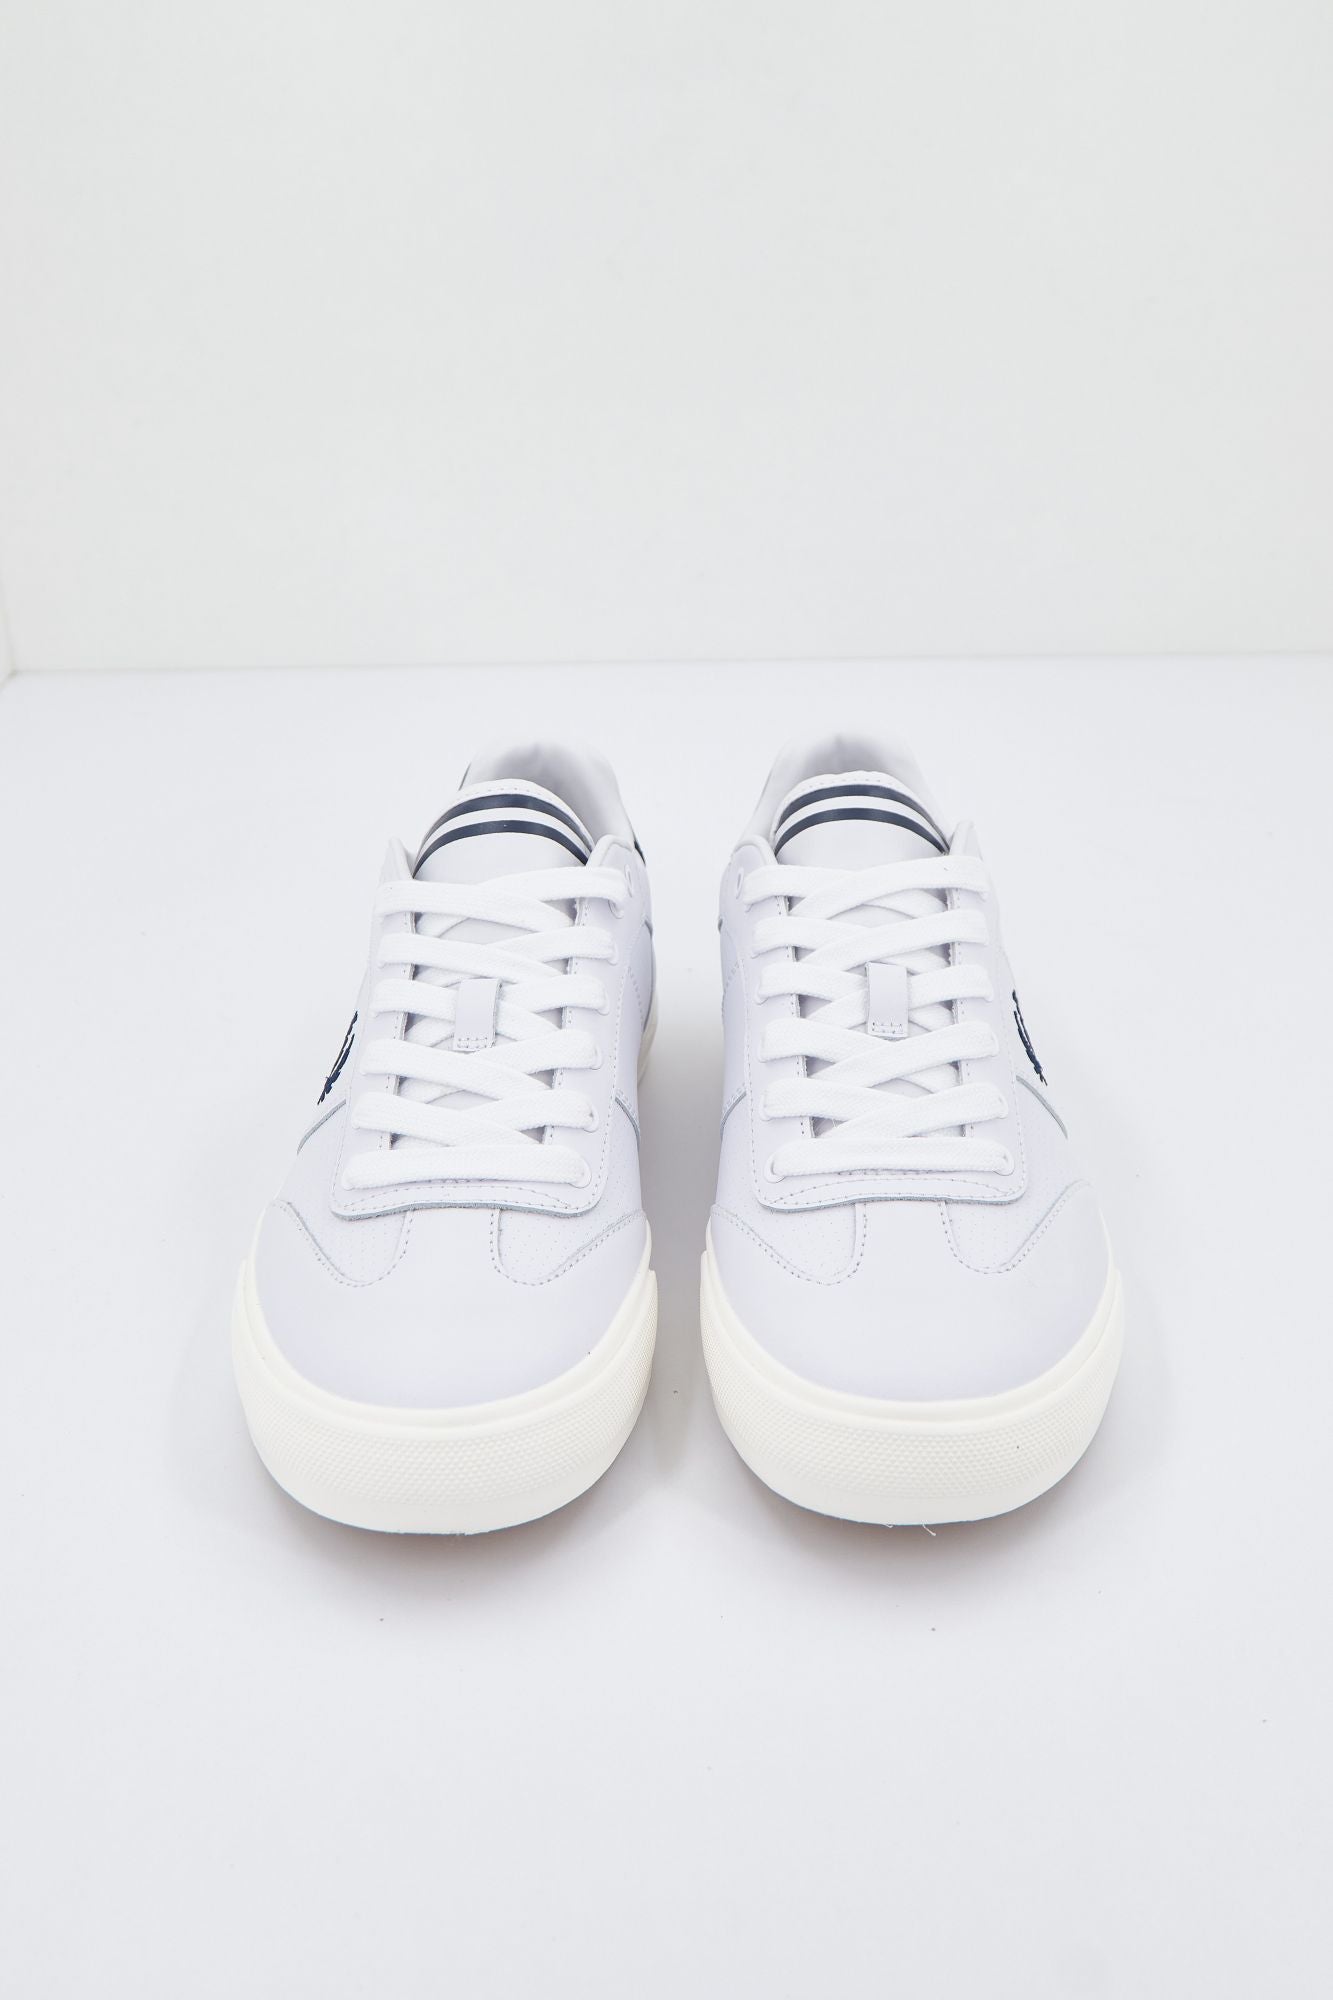 FRED PERRY CLAY PERF LEATHER en color BLANCO (3)